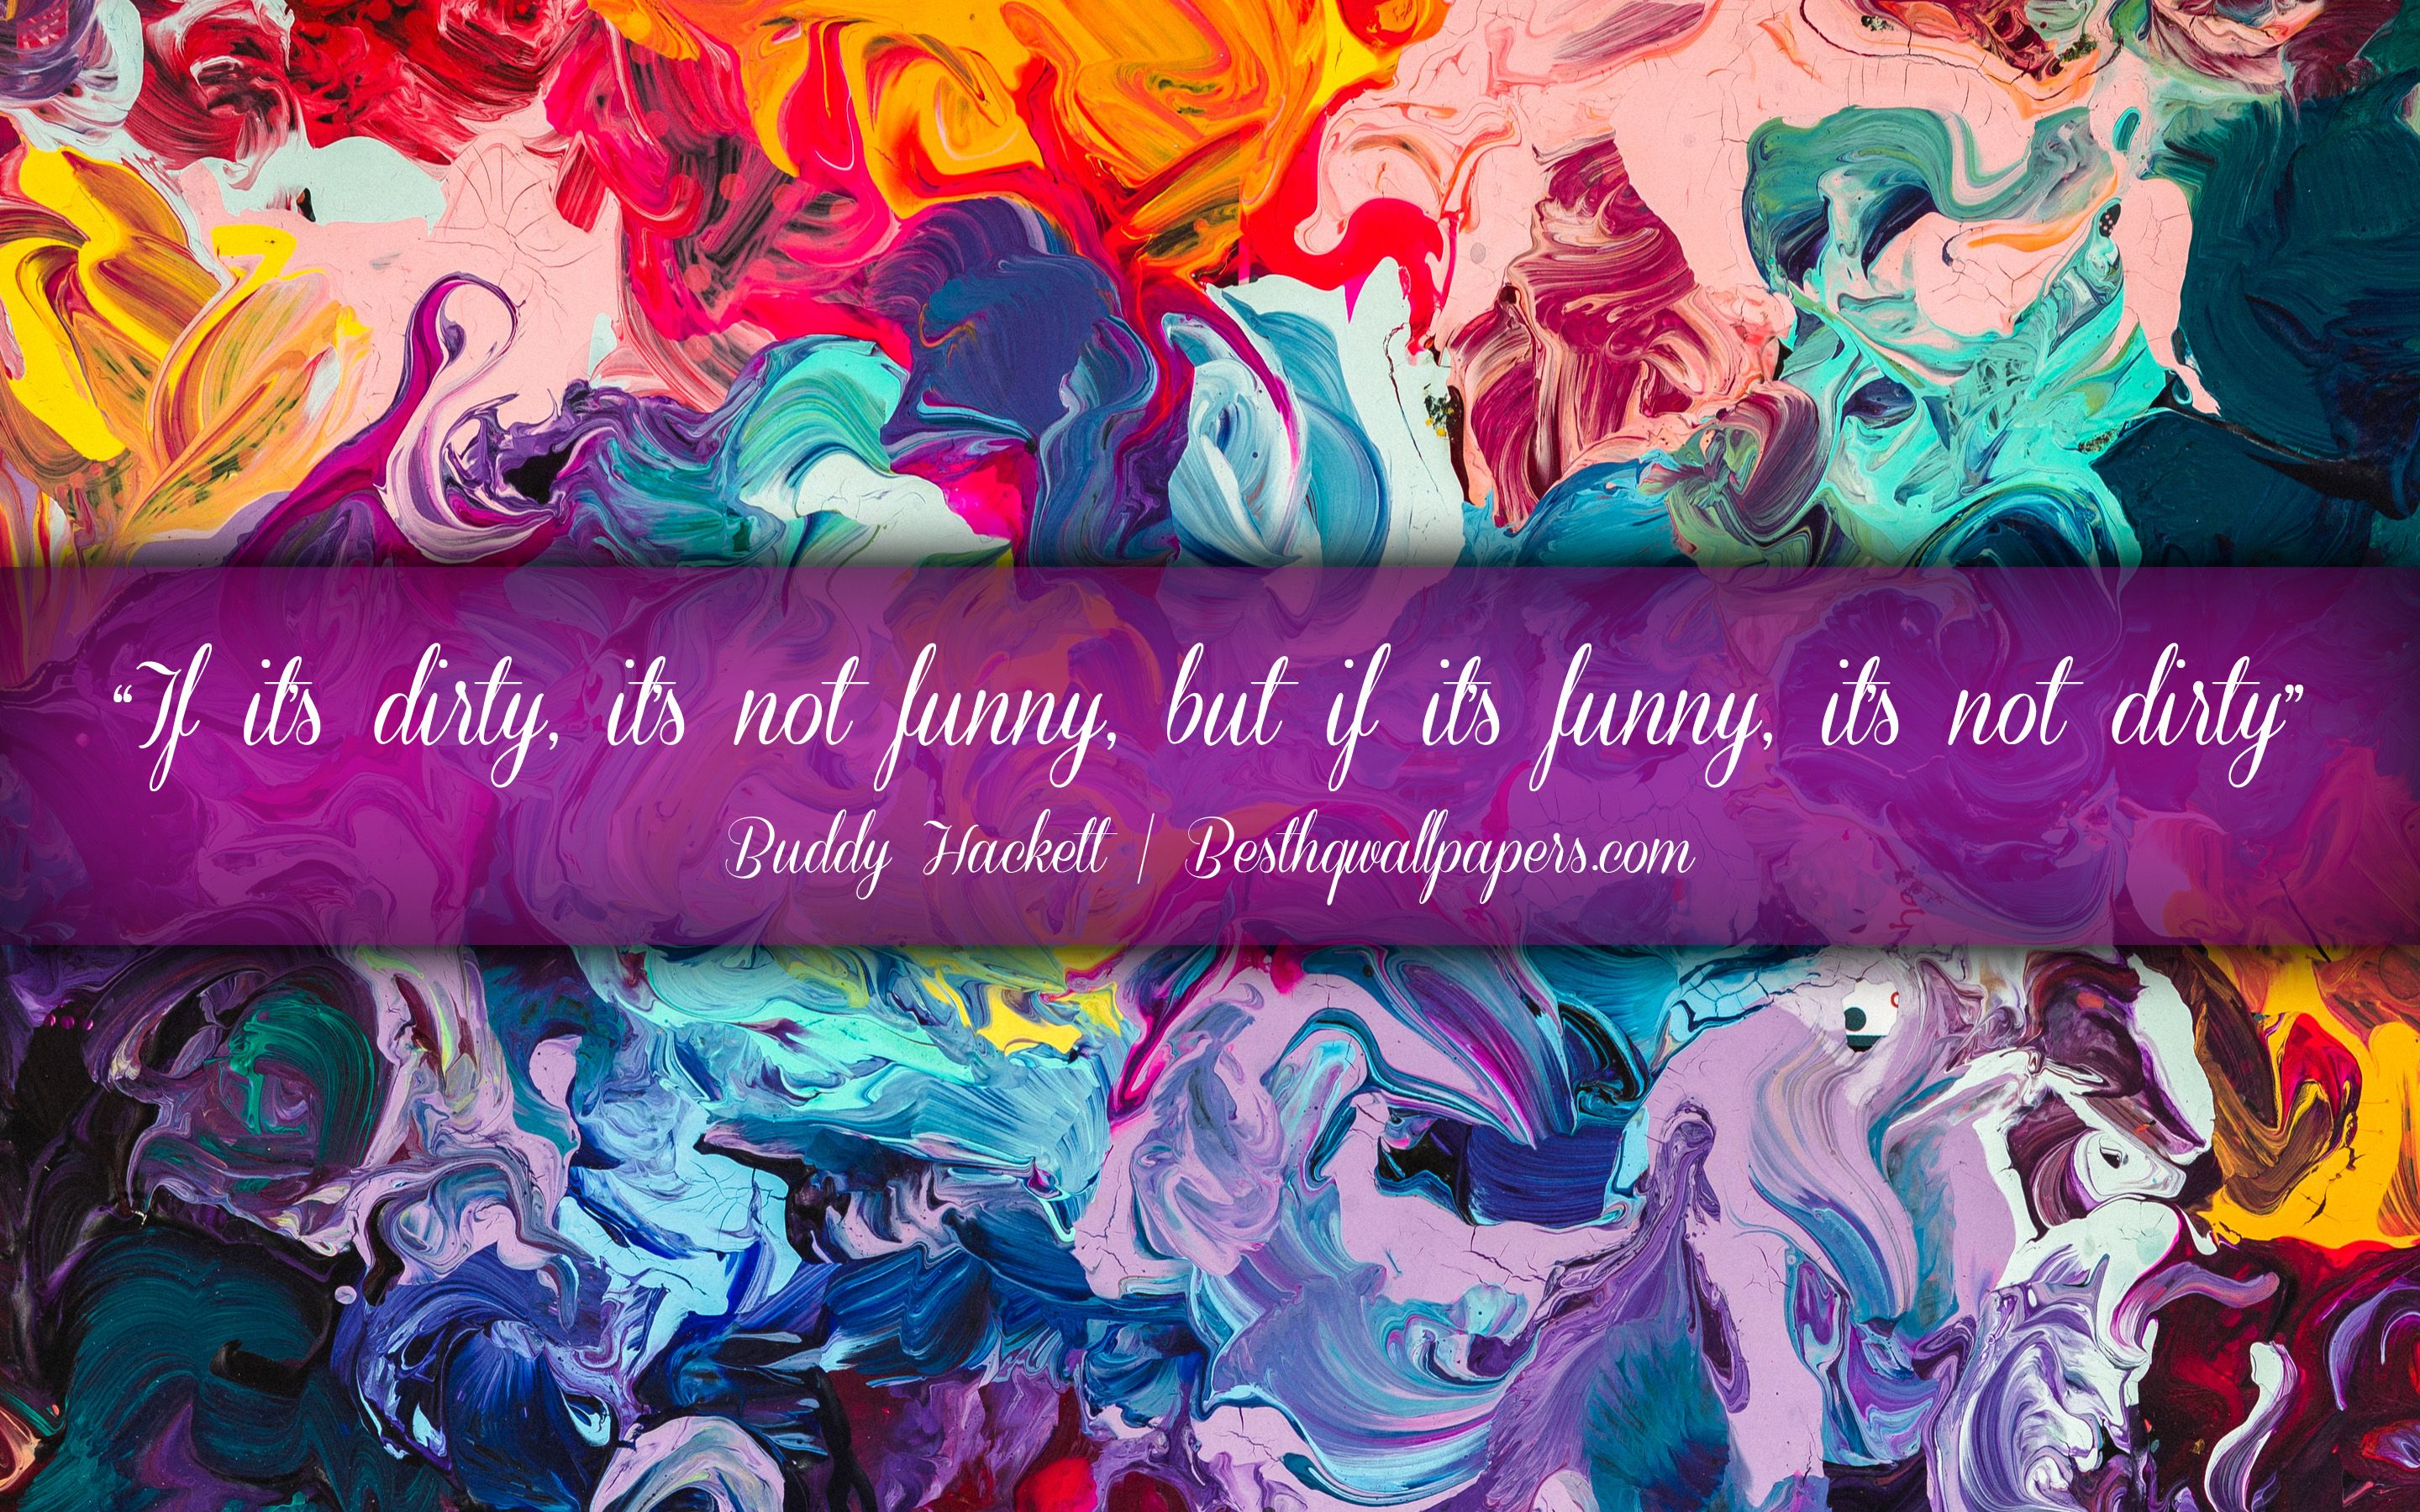 Download wallpaper If its dirty Its not funny But if its funny Its not dirty, Buddy Hackett, calligraphic text, quotes about mess, Buddy Hackett quotes, inspiration, artwork background for desktop with resolution